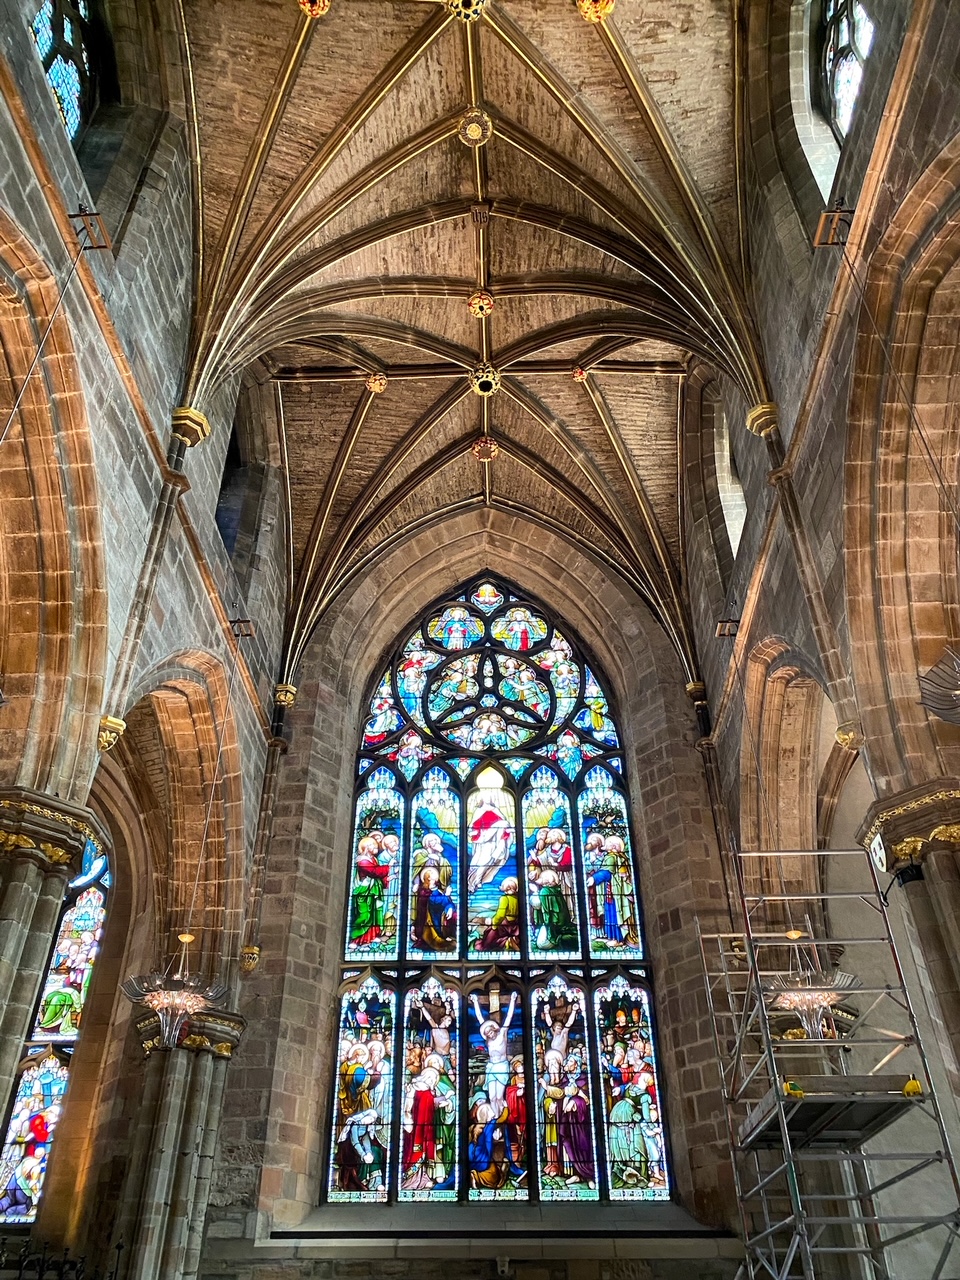 stained glass windows inside St Giles' Cathedral